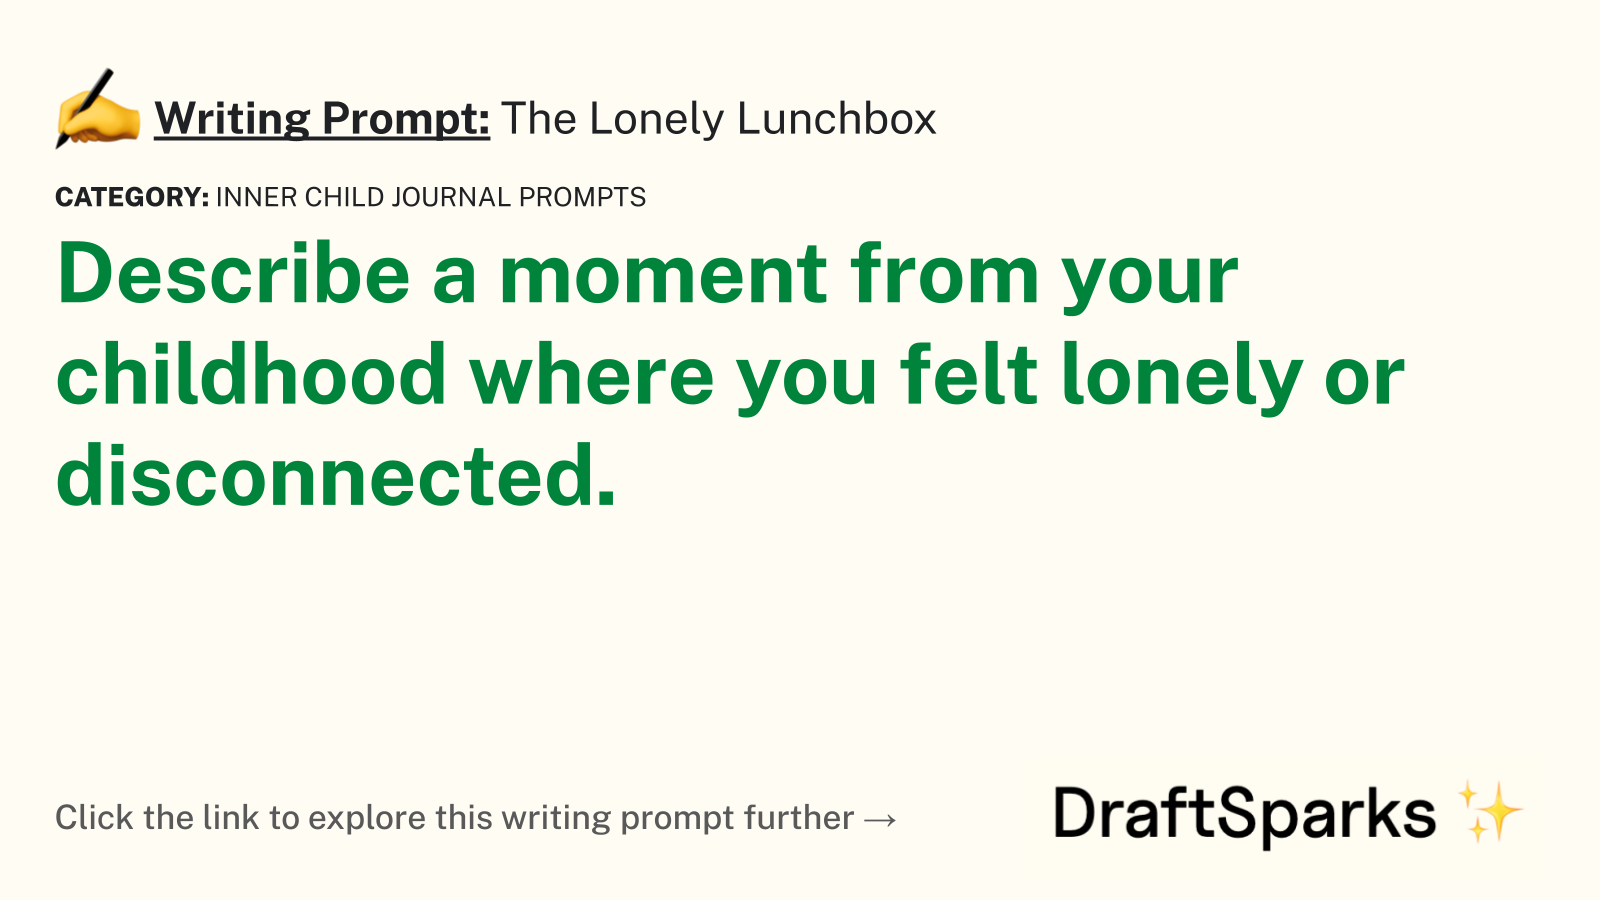 The Lonely Lunchbox